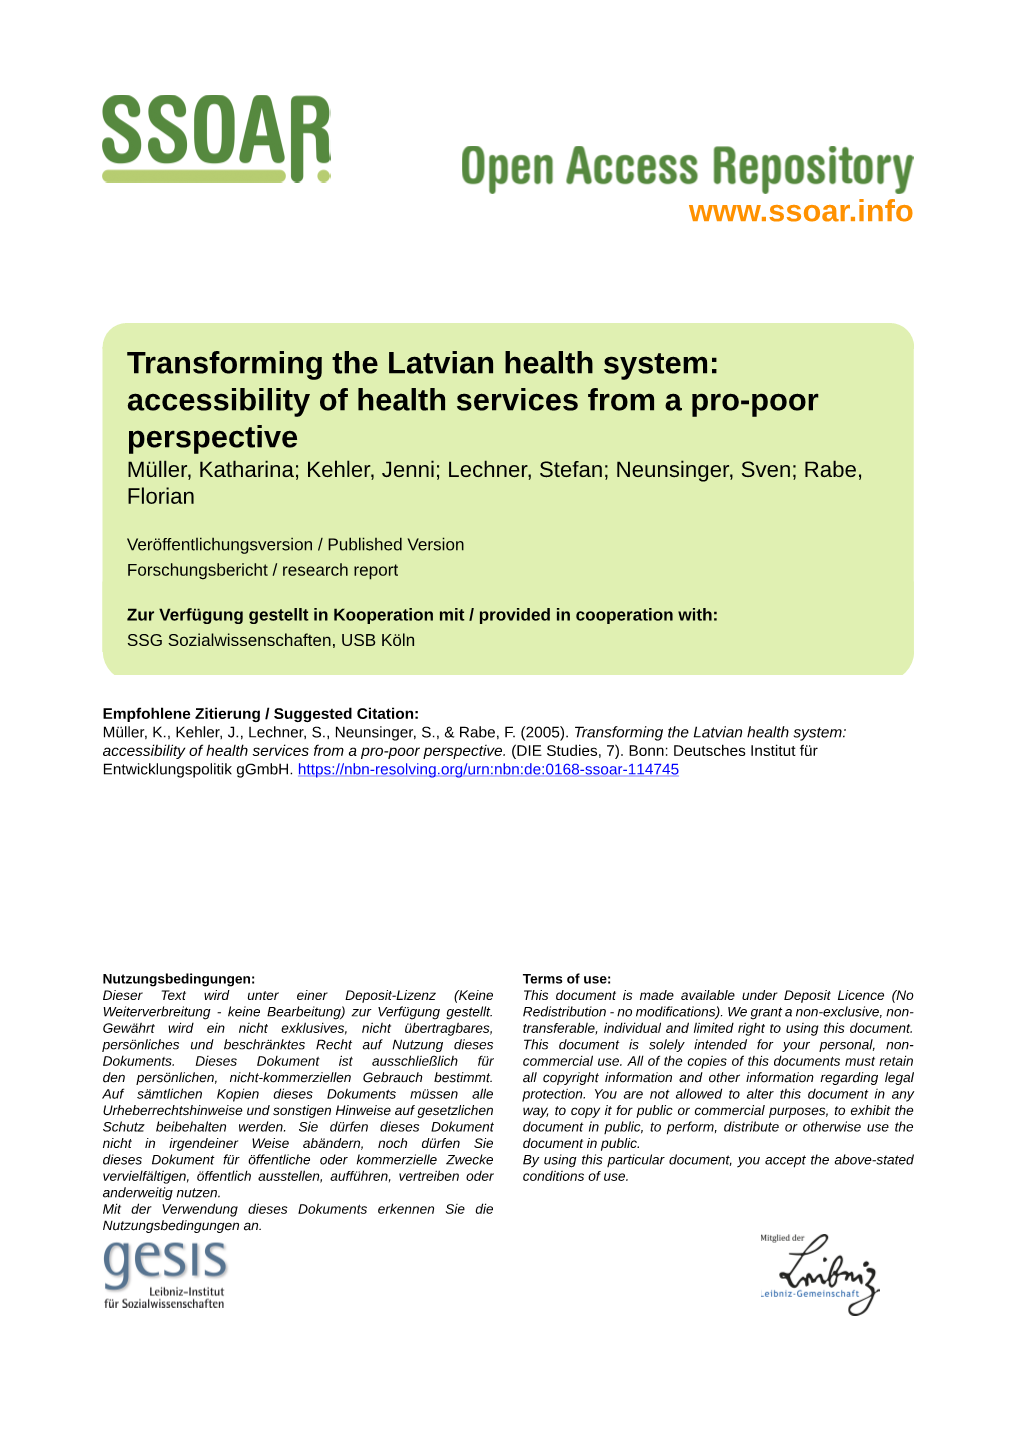 Accessibility of Health Services from a Pro-Poor Perspective Müller, Katharina; Kehler, Jenni; Lechner, Stefan; Neunsinger, Sven; Rabe, Florian